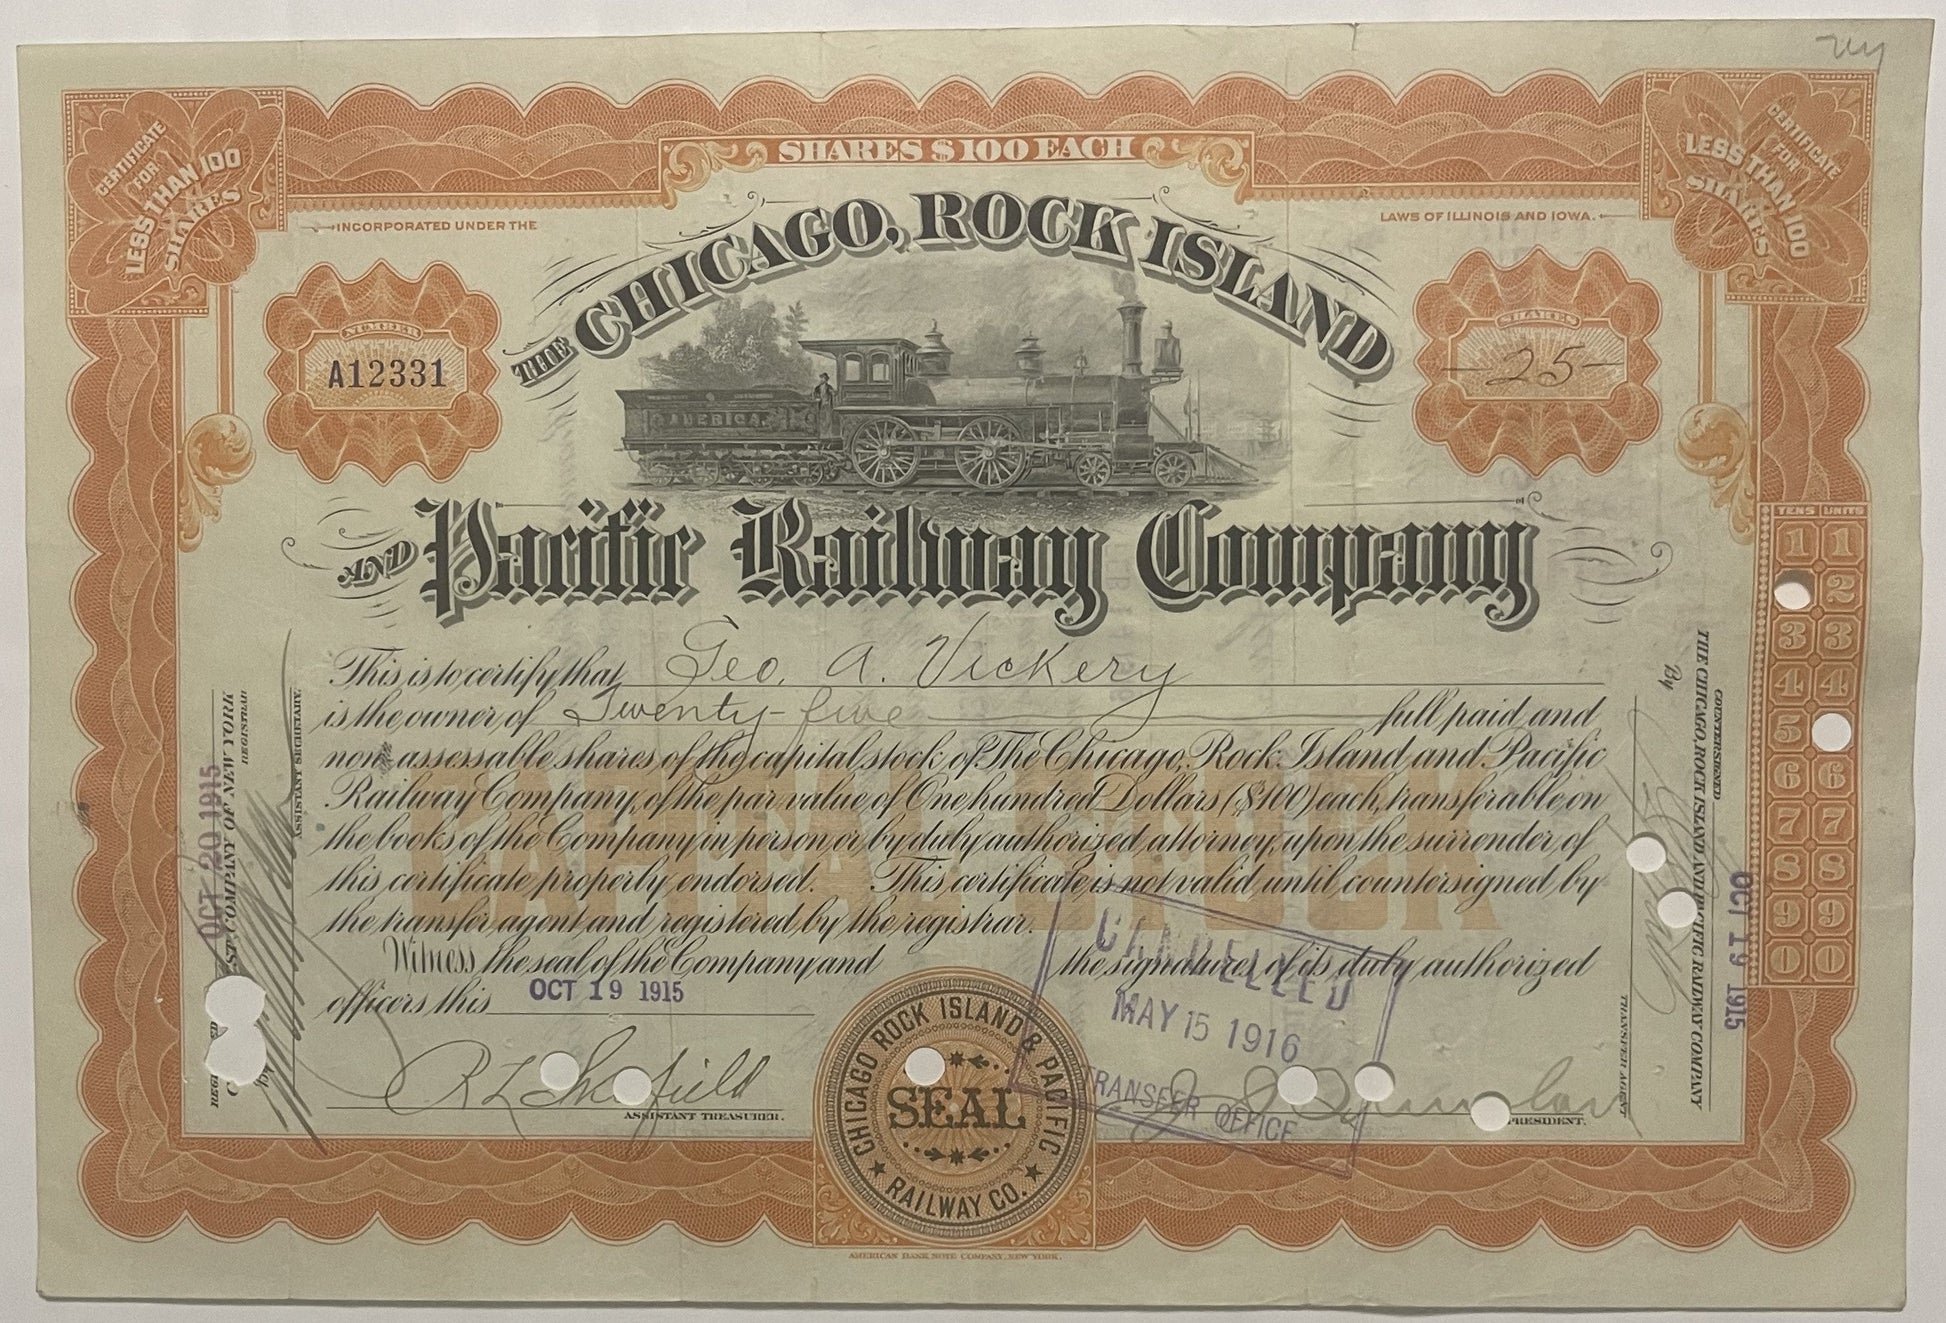 Antique 1915 Chicago Rock Island Pacific Railroad Stock Certificate Collectibles Collectible Certificate: